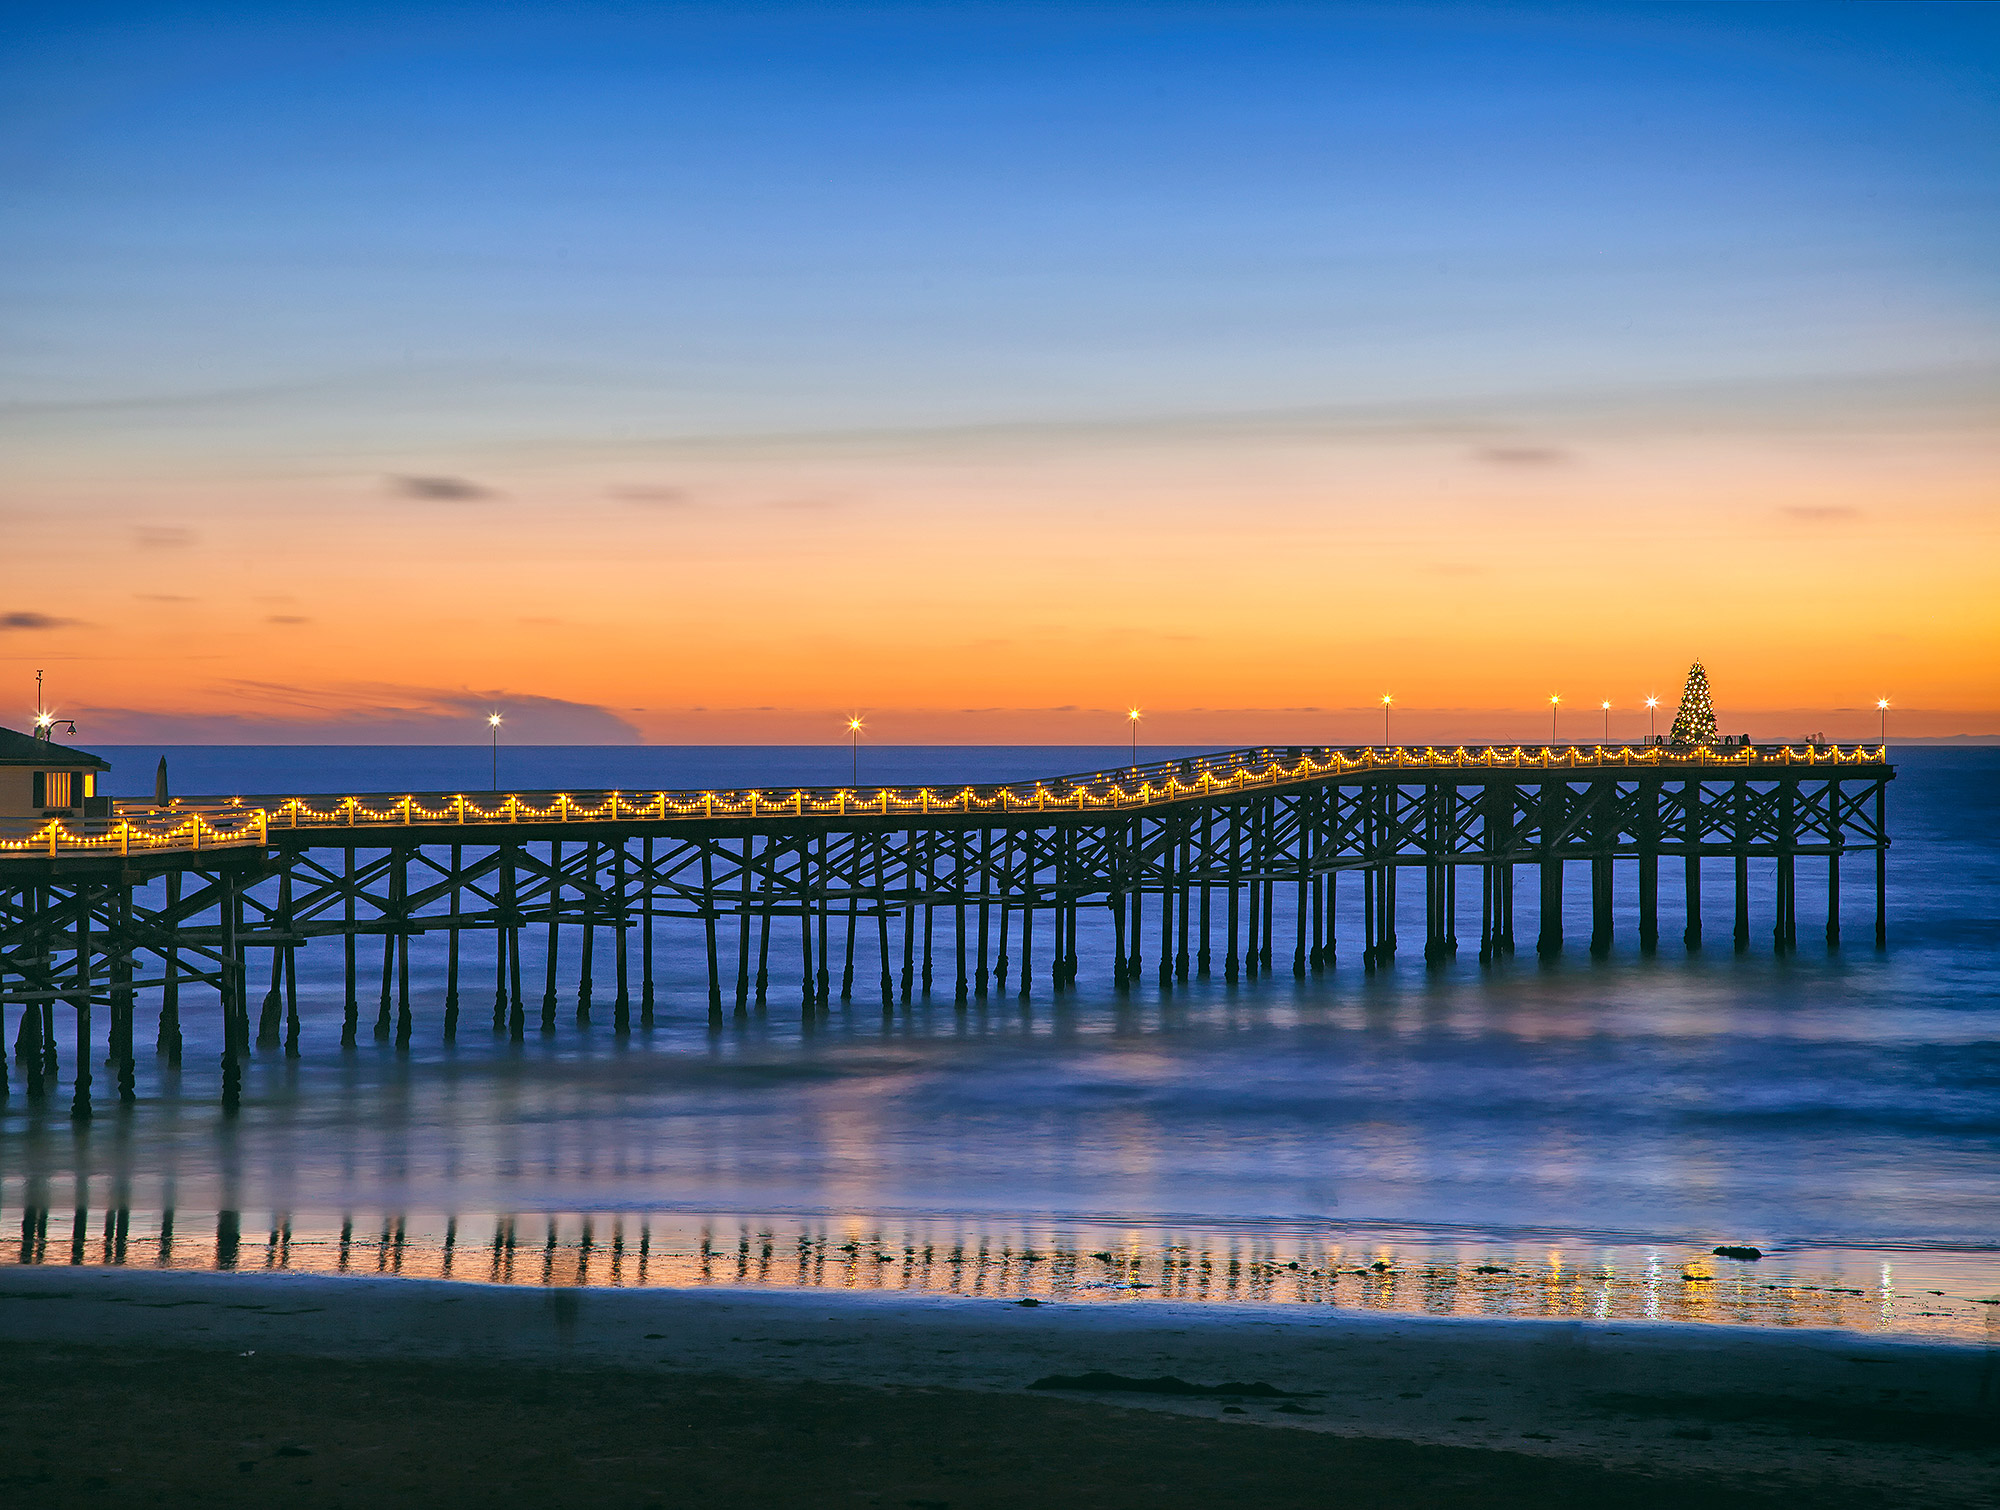 San Diego Crystal Pier at sunset featuring holiday lights strung on pier, the ocean and a Christmas tree at the end of pier